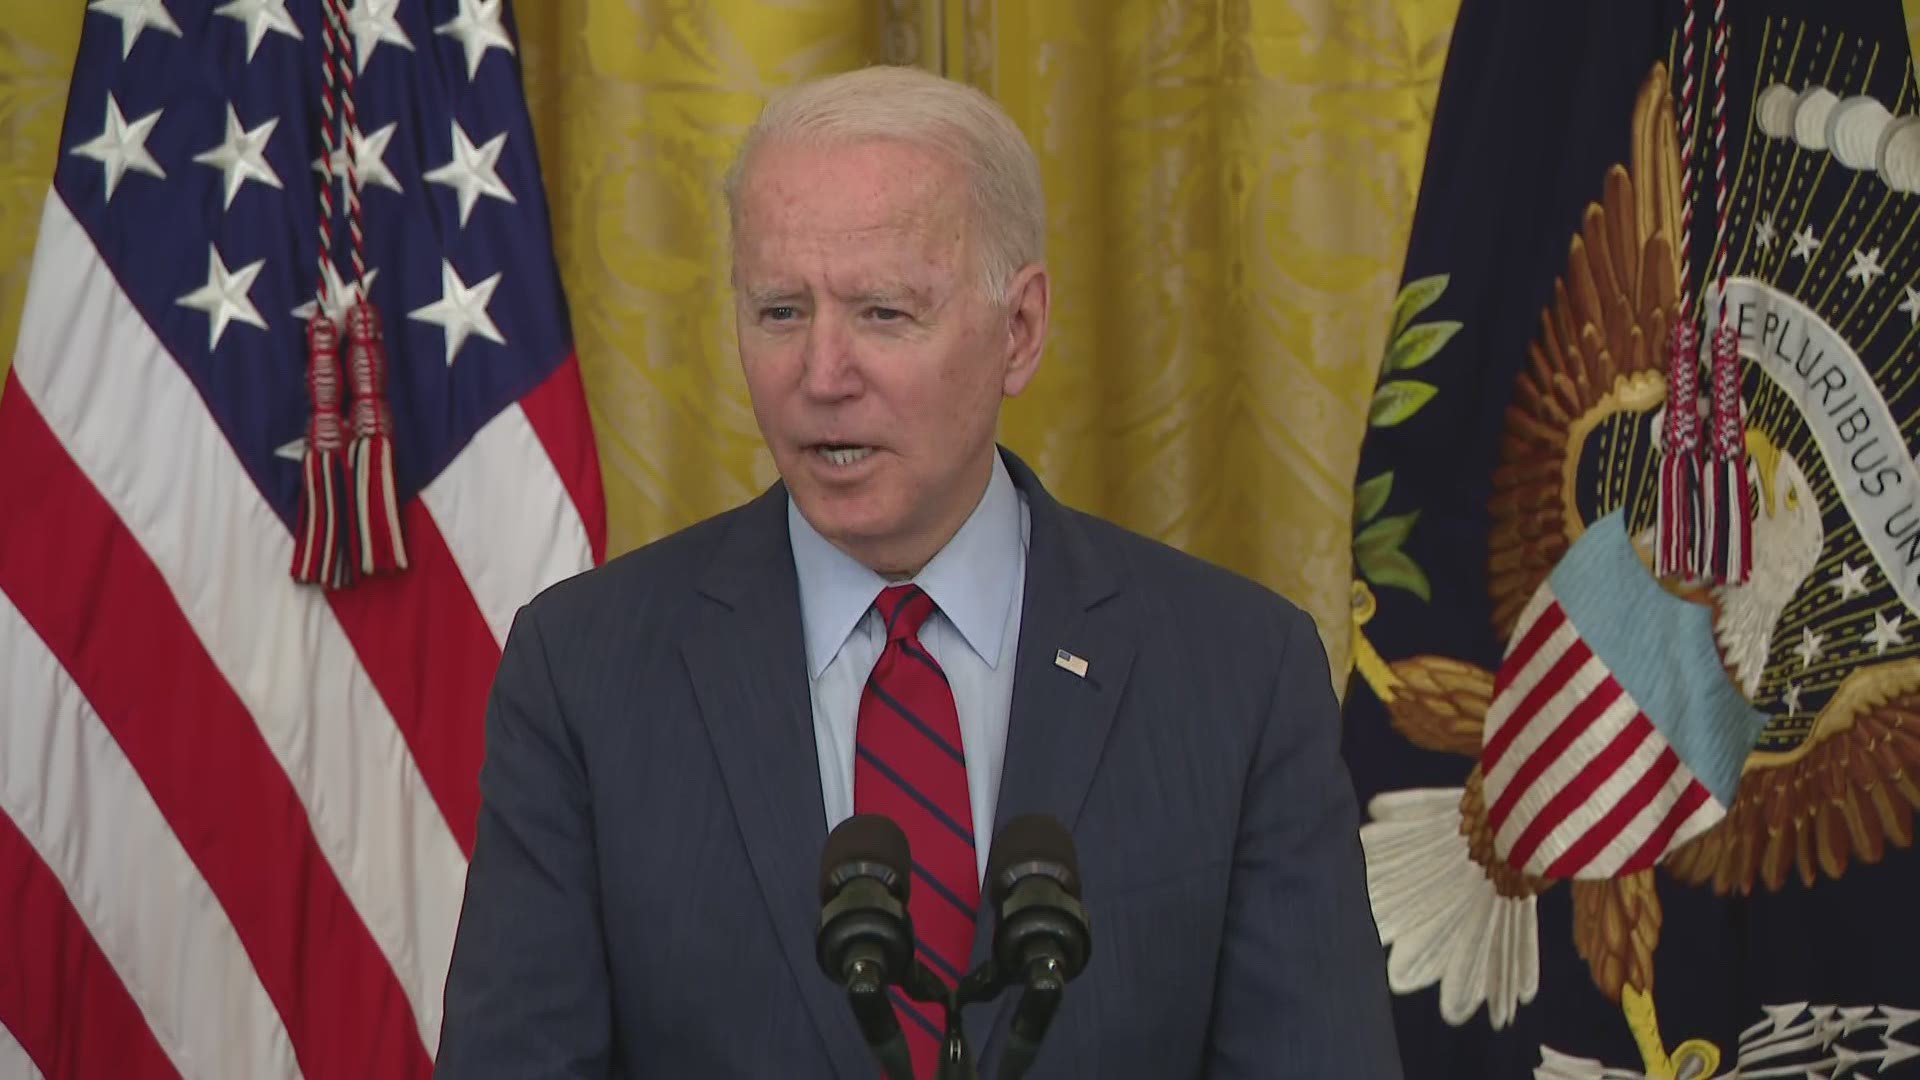 President Joe Biden called the infrastructure deal he announced Thursday "long overdue" as he talked about the impact the deal would have on Americans.